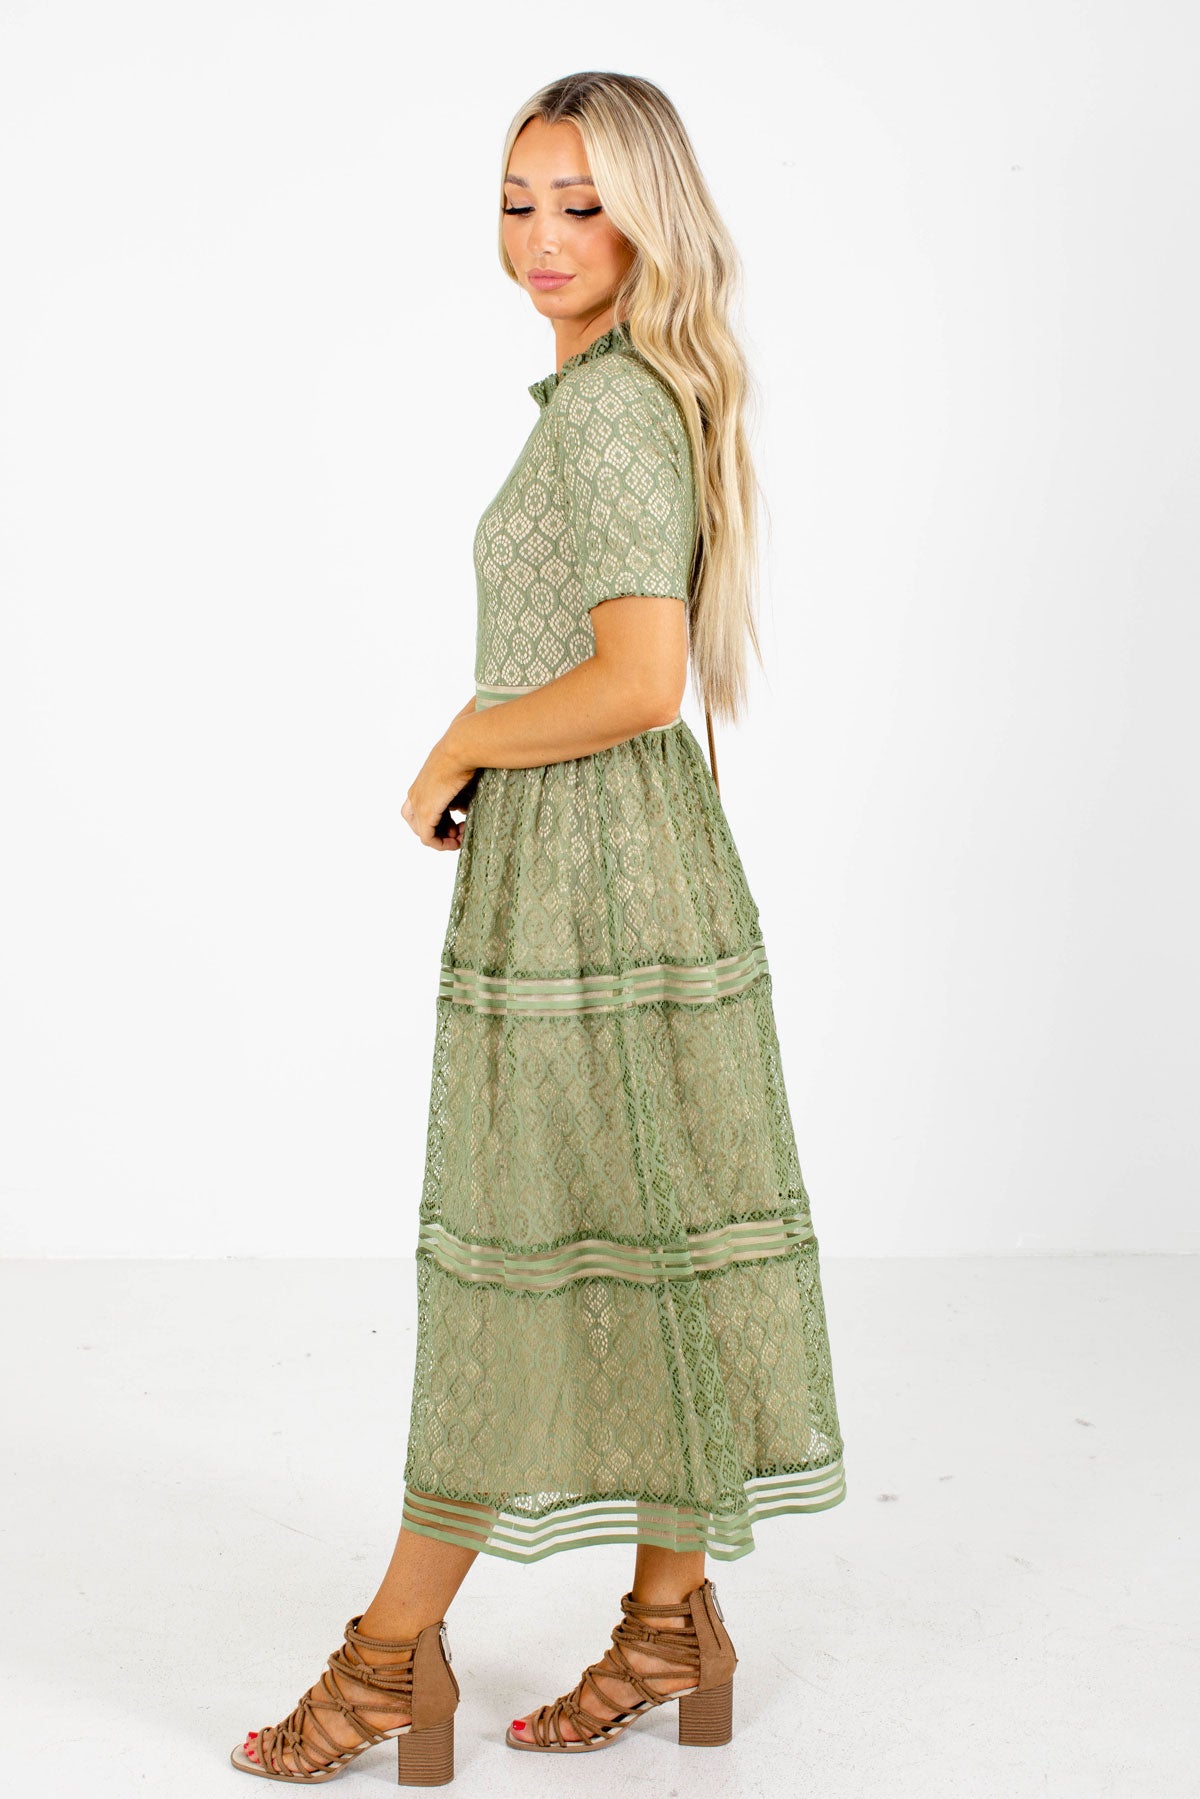 Women's Green Lace Dress Boutique Clothing